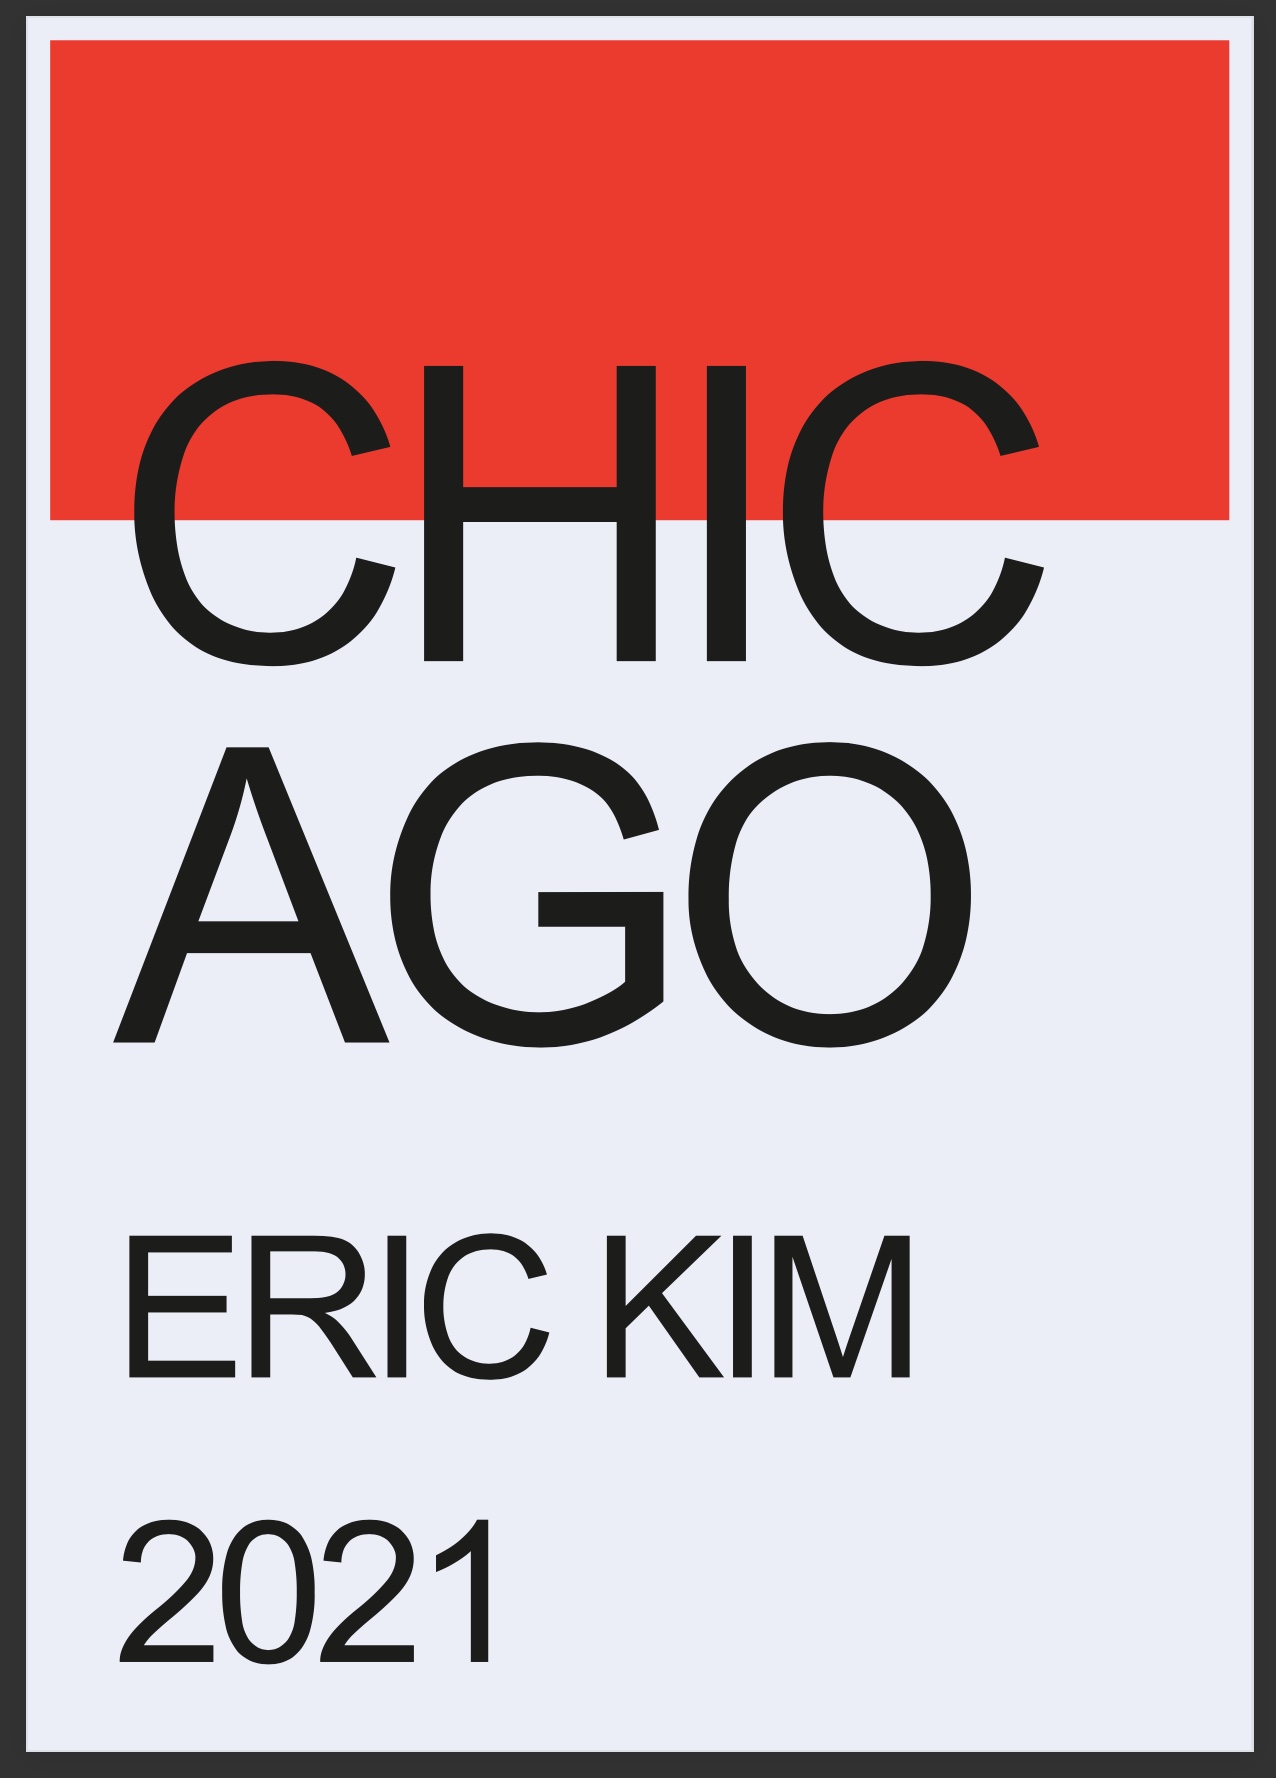 Chicago by ERIC KIM